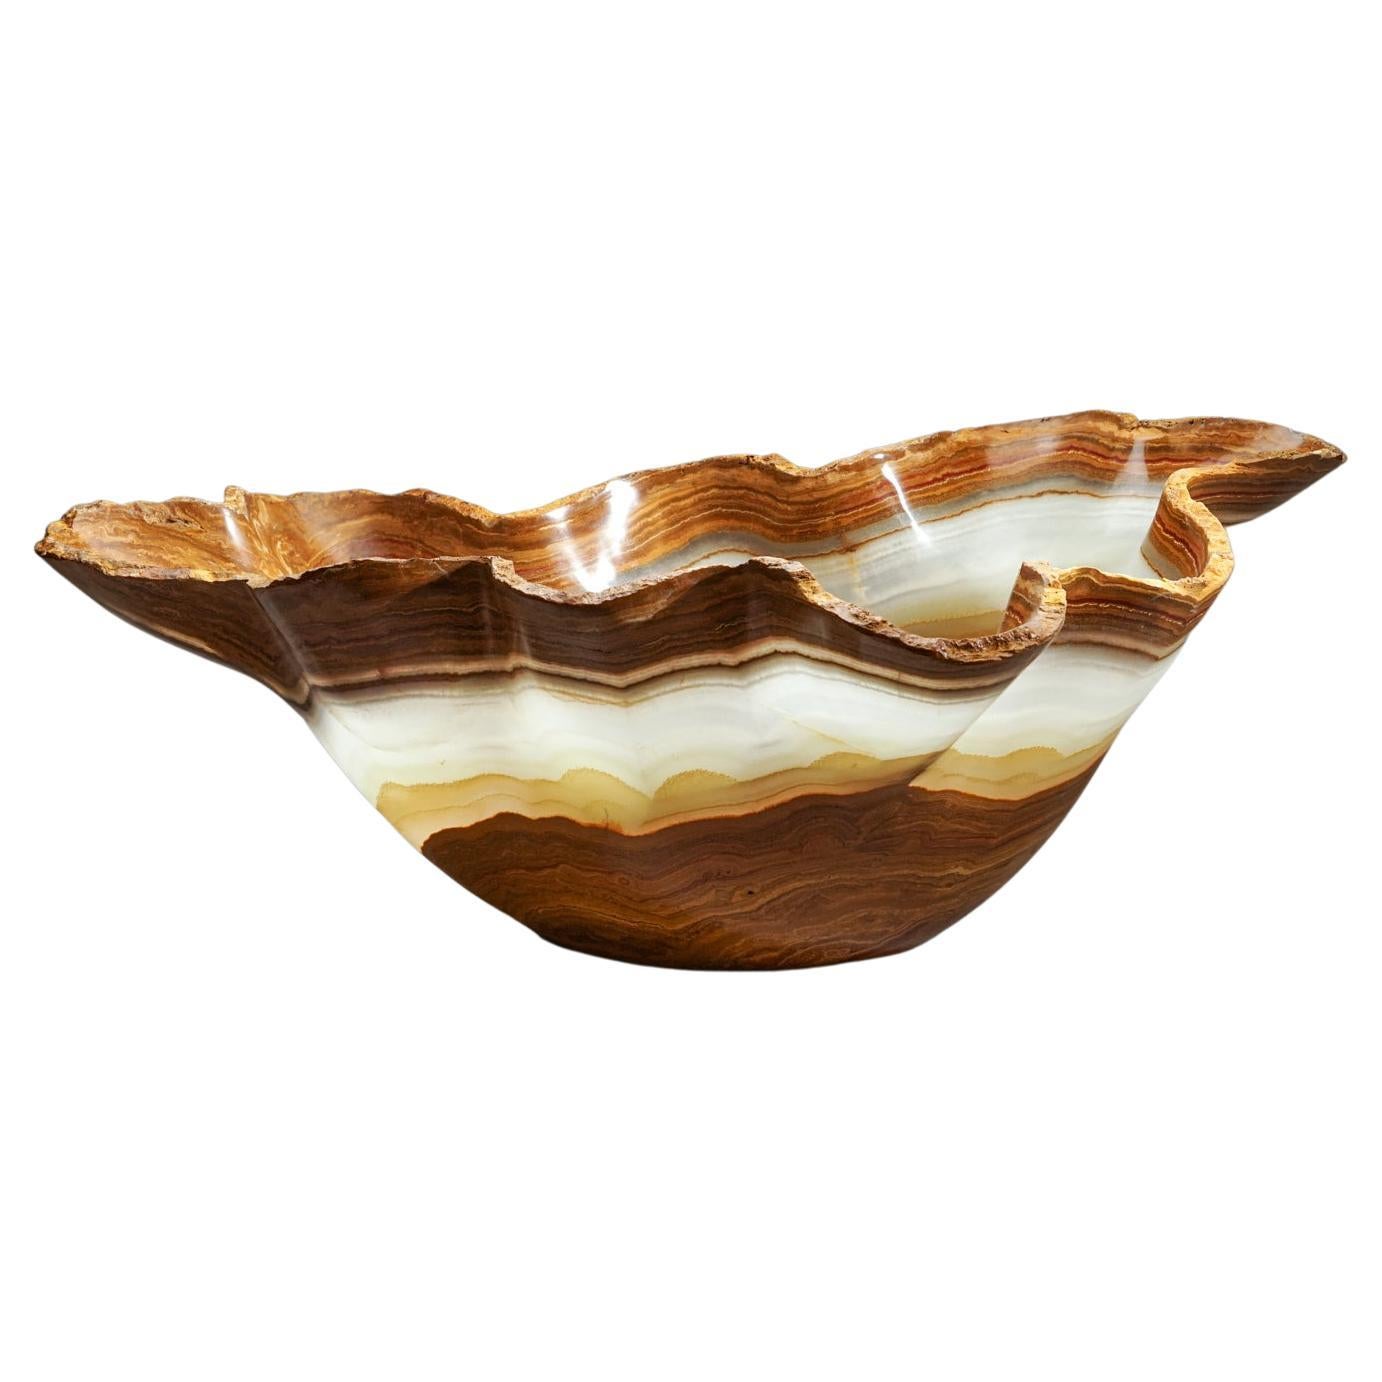 Large Polished Onyx Decorative Bowl from Mexico (29" x 18.5" x 9.5", 30 Lbs.)